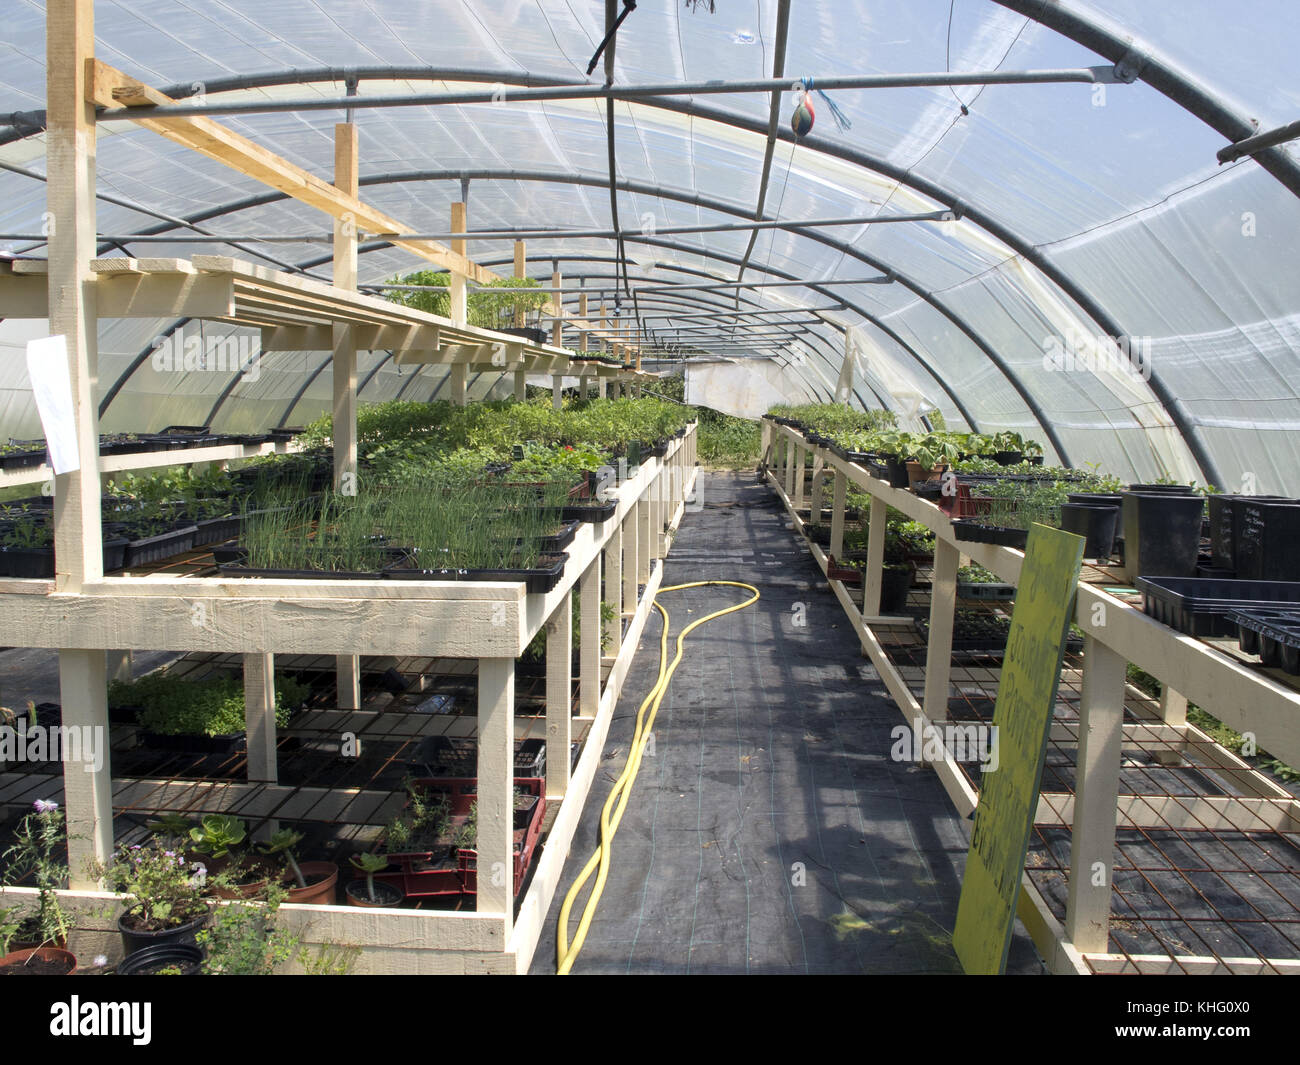 France, Corsica, Cap Corse, West coast, Nursery greenhouse with seedlings Stock Photo